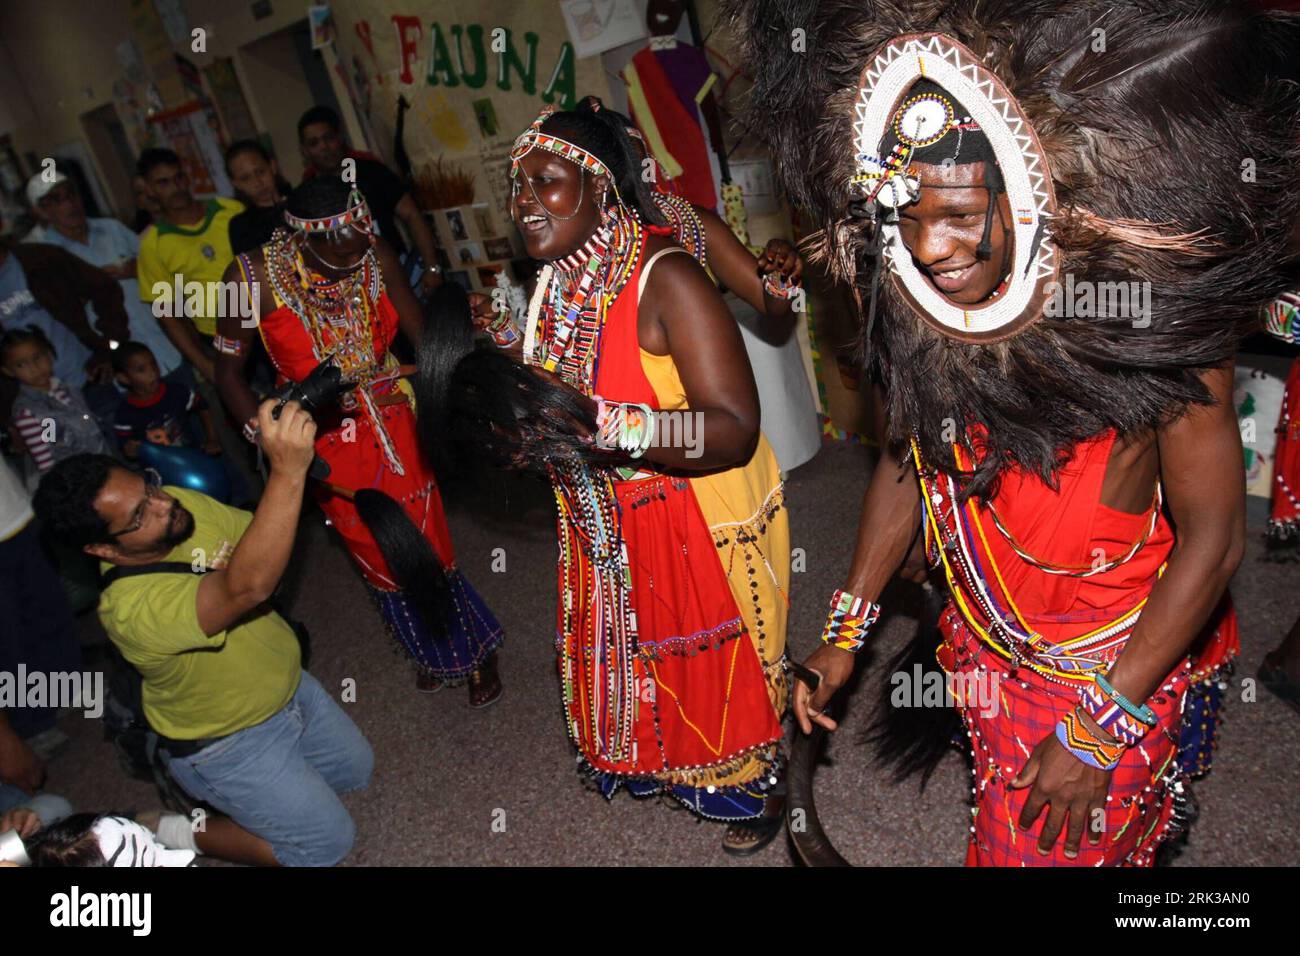 Bildnummer: 53399475  Datum: 21.09.2009  Copyright: imago/Xinhua (090921) -- CARACAS, Sept. 21, 2009 (Xinhua) -- African artists show their traditional culture in central Caracas, capital of Venezuela, on Sept. 20, 2009. A multicultural parade featuring peoples from Africa and South America on Sunday marked the start of a cultural festival dedicated to the second South America-Africa Summit that will take place on Margarita Island, a tourist resort in northeastern Venezuela. (Xinhua/Bolivar News Agency) (lr) (1)VENEZUELA-CARACAS-MULTICULTURAL PARADE PUBLICATIONxNOTxINxCHN Kultur Festival Kultu Stock Photo